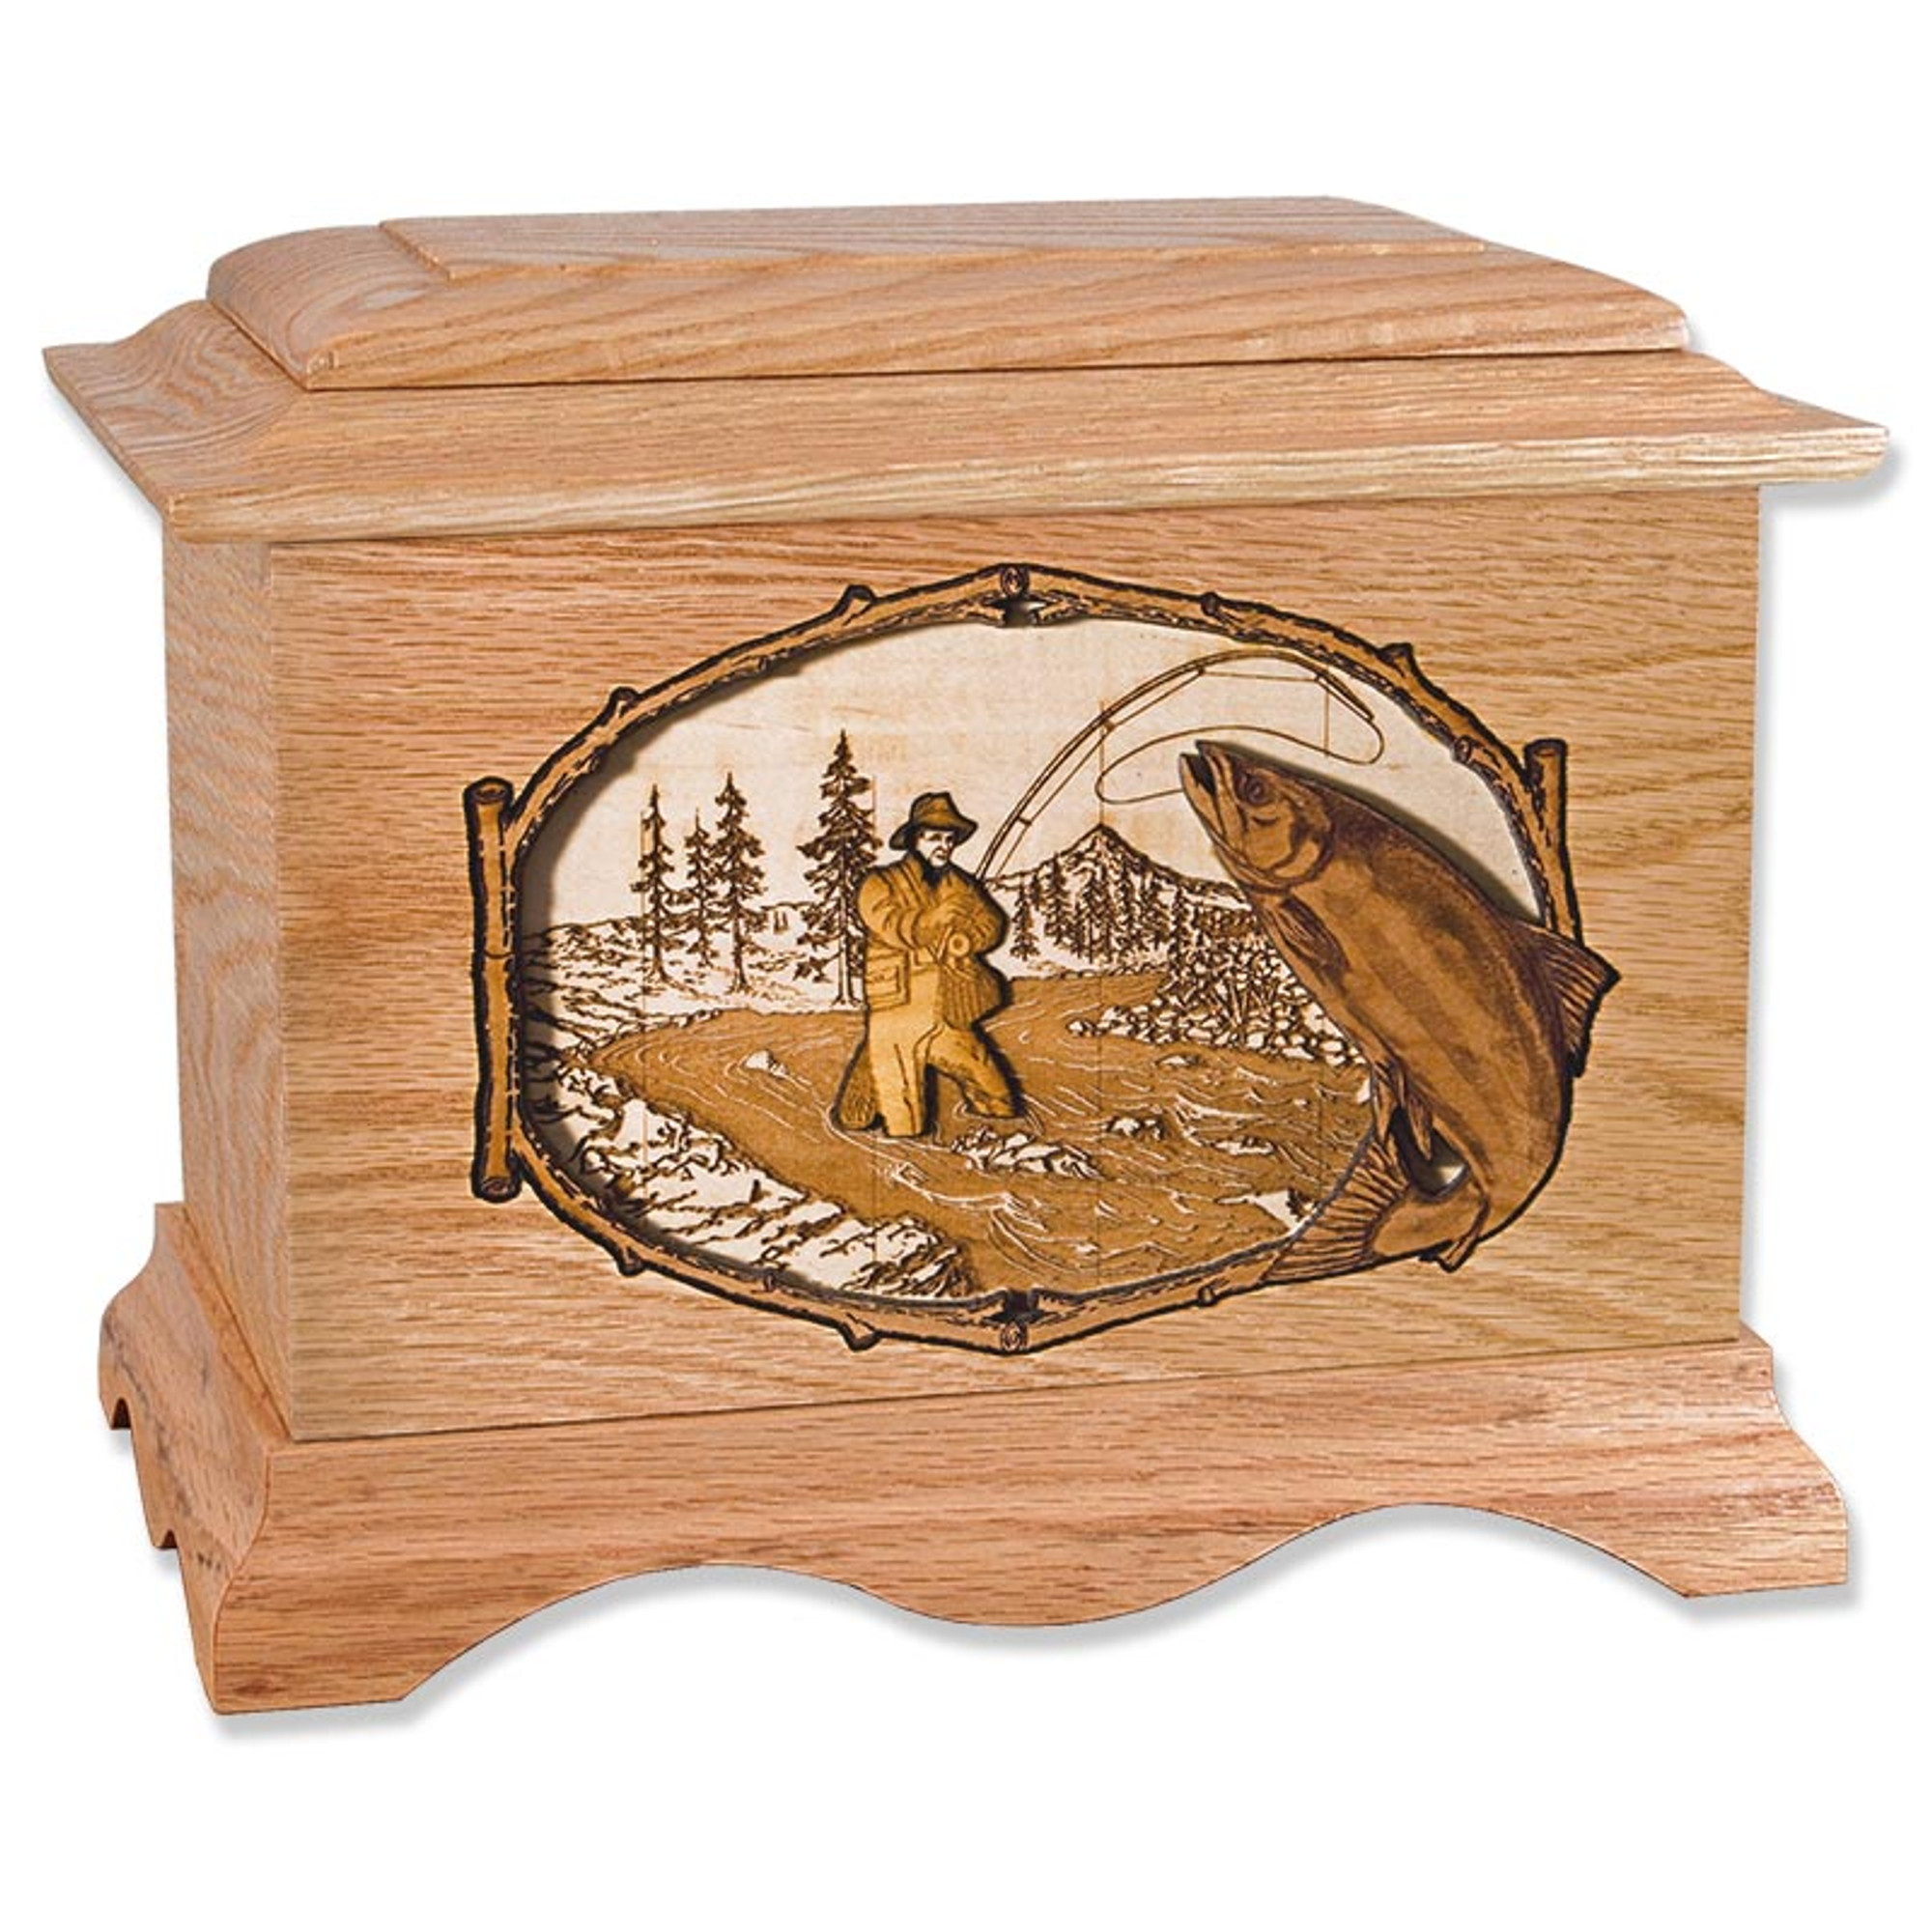 Personalised Engraved Wooden Fishing Box, Tackle Box with Fishing Line